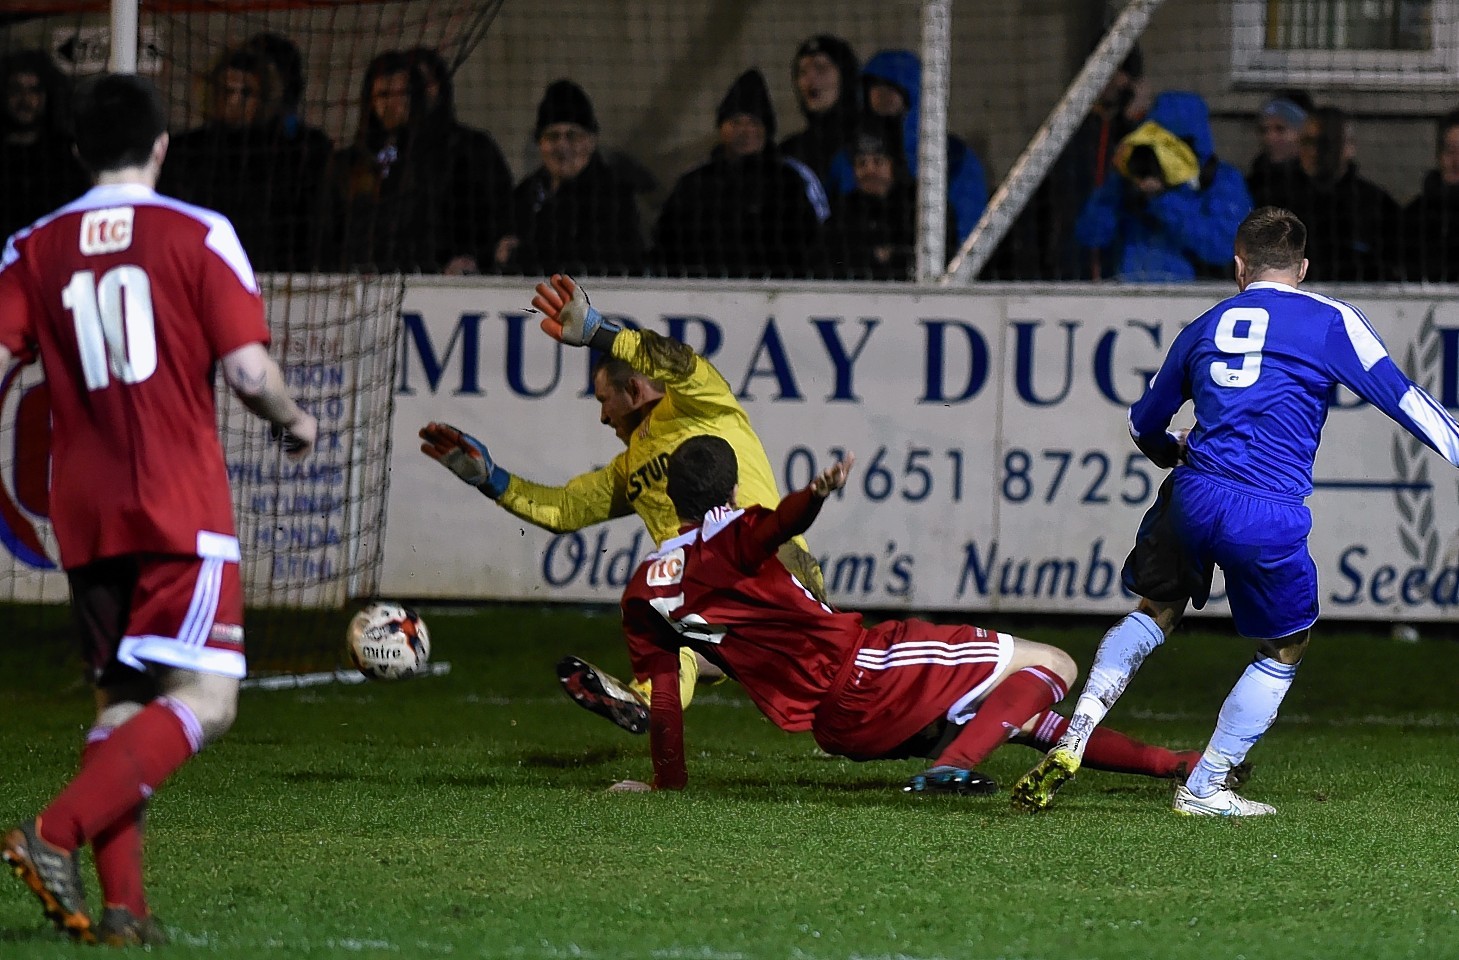 Cove striker Daryl Nicol scores the only goal of the game